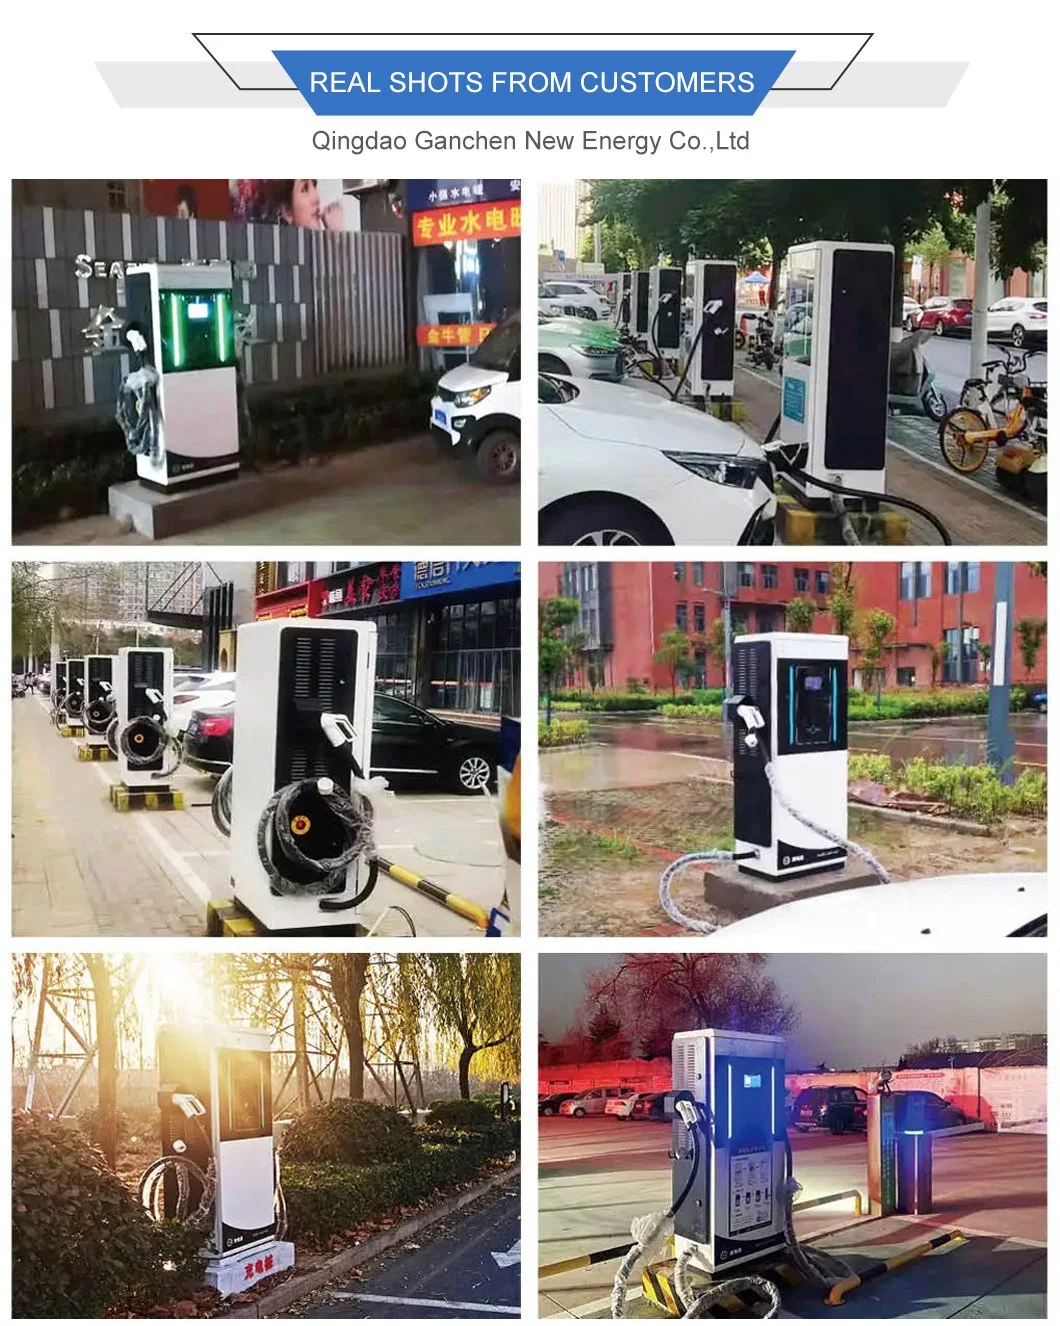 CCS1 CCS2 EV Charger Electric Vehicle Charging Pile Manufacturer 60kw 120kw 160kw 180kw 240kw 380V DC EV Charging Stations with Two Guns